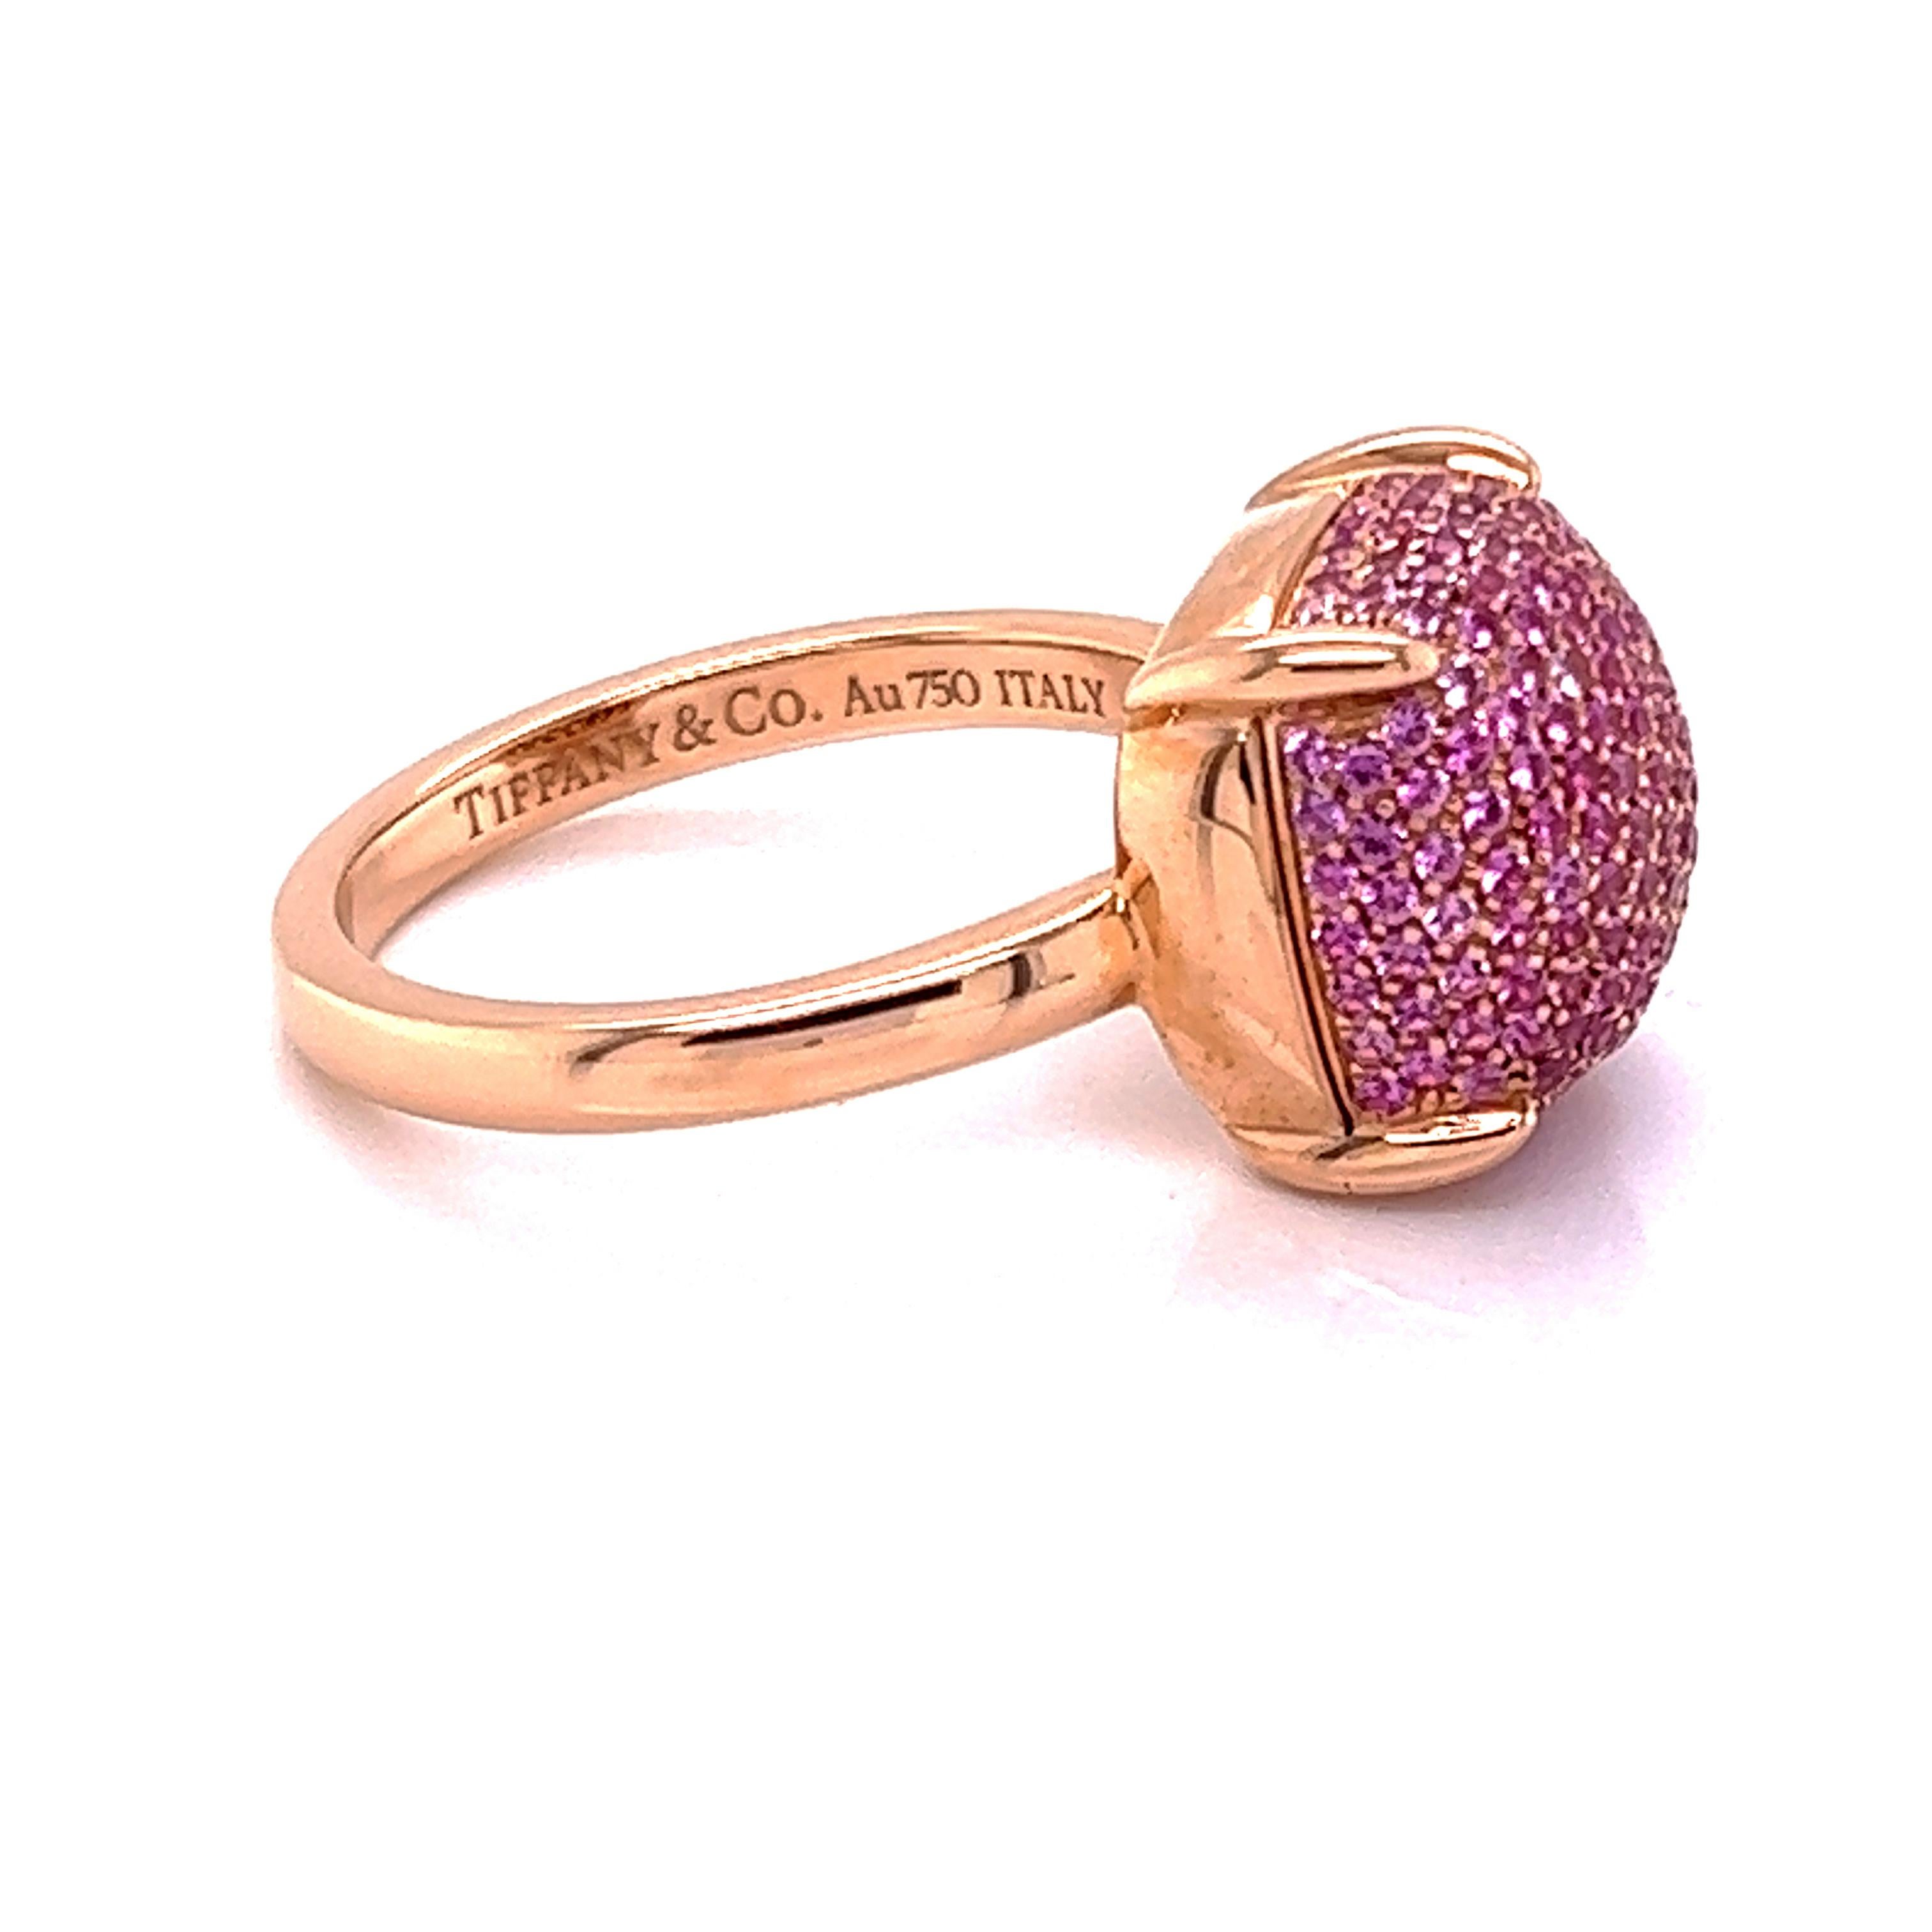 This is a beautiful authentic ring from Tiffany & Co. by designer Paloma Picasso from her Sugar Stacks Collection. It is crafted from 18k rose gold with a polished finish. The top of the ring has a cushion shape bridge with a high dome set with